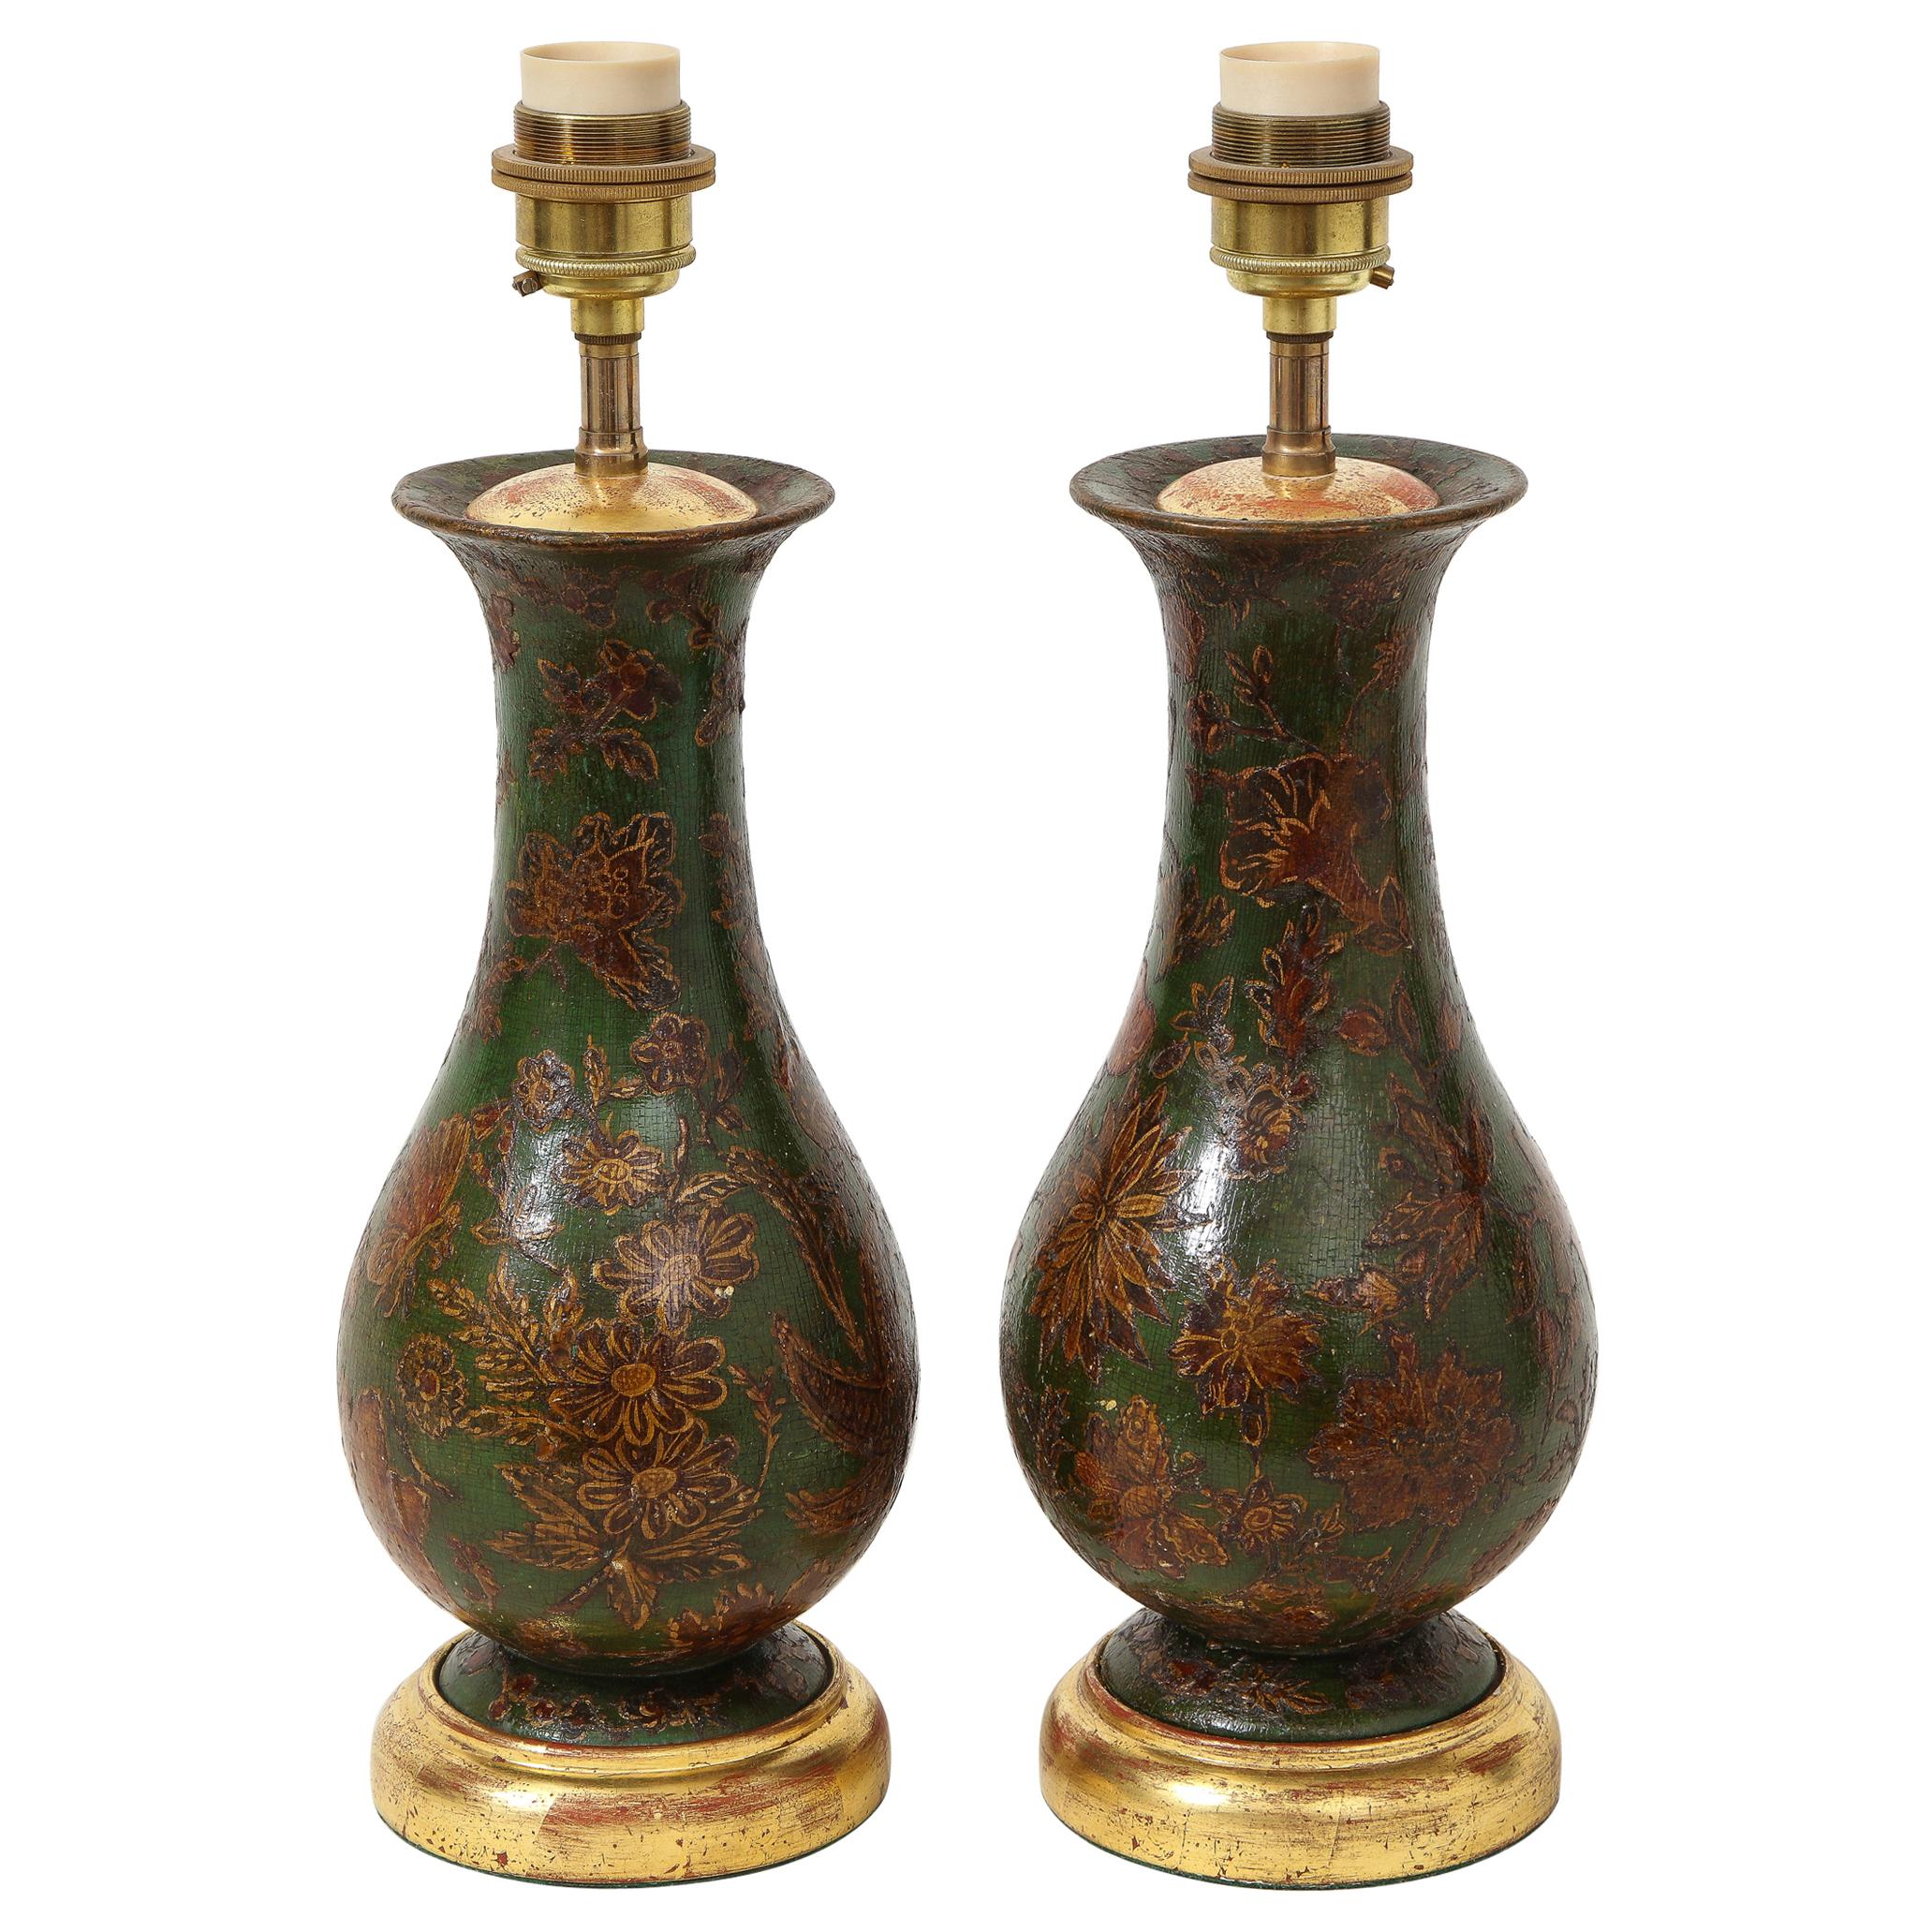 Pair of George III Green-Painted Decoupaged Wood Vases Mounted as Lamps